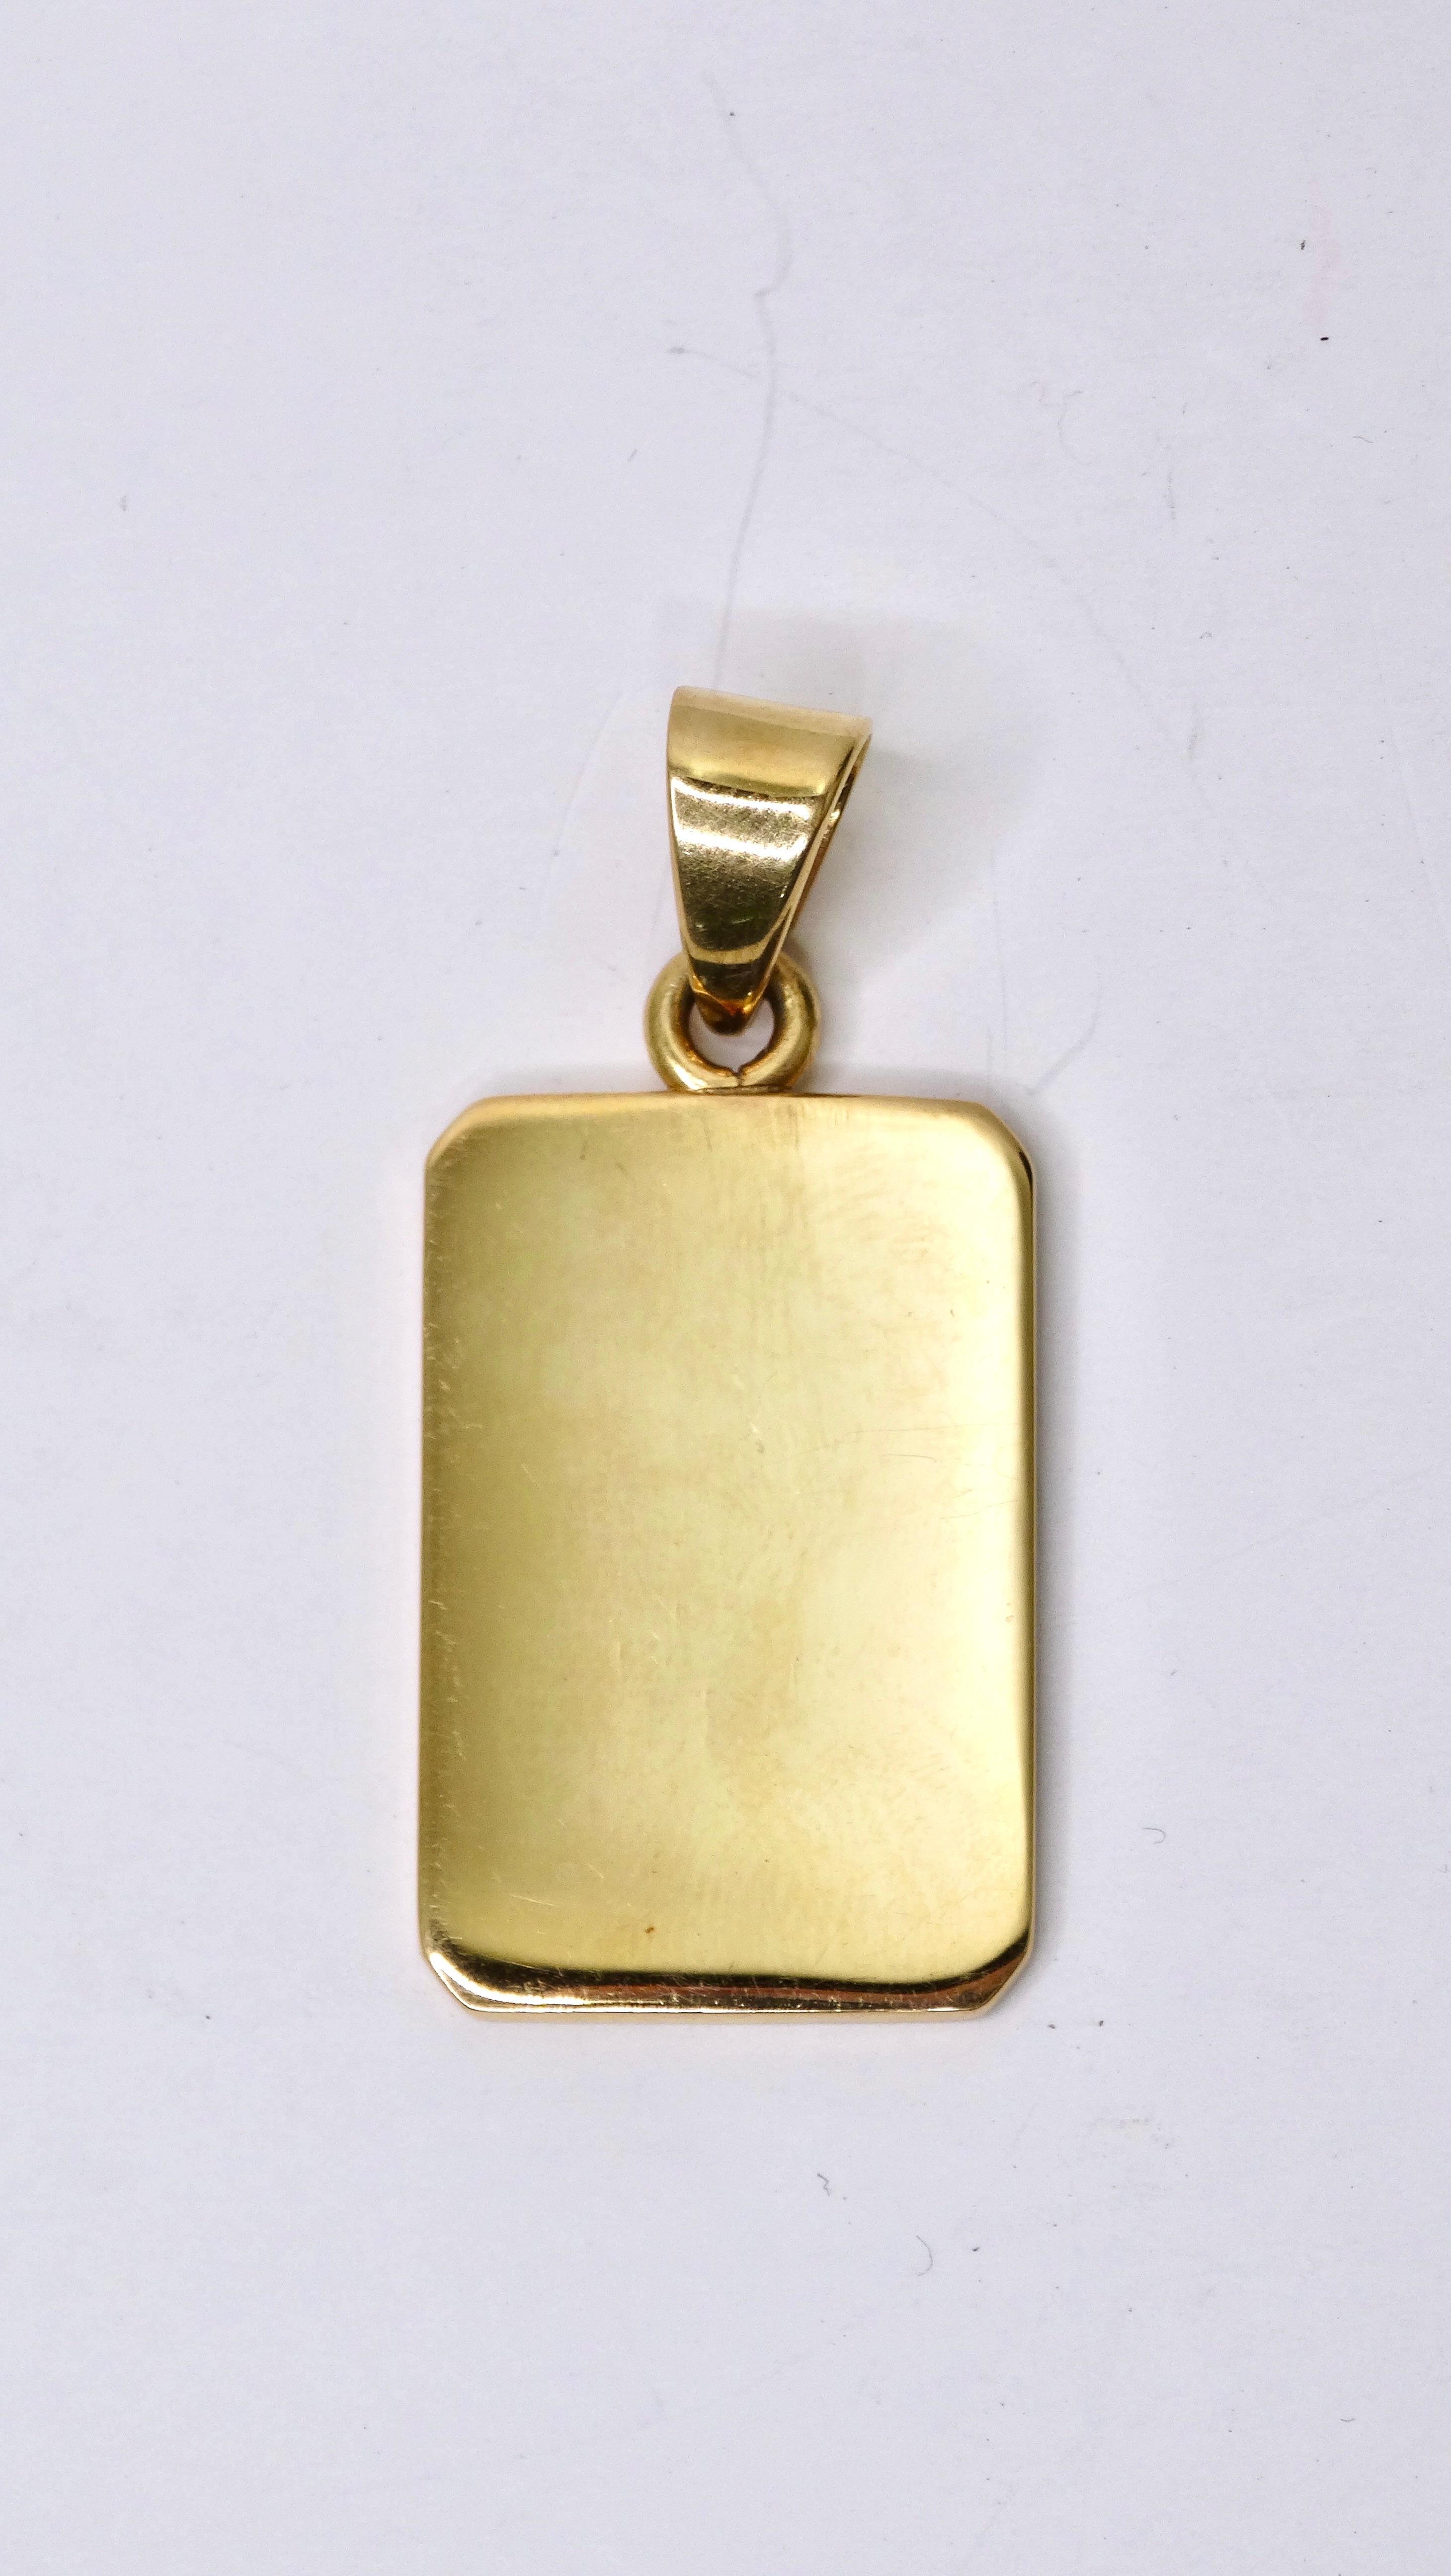 You can take this bold pendant with you everyday because of its elegant and simple design! You can't go wrong with this 14k gold dog tag pendant! It can be easily dressed up or down with the switch of an outfit. It would look fabulous worn with